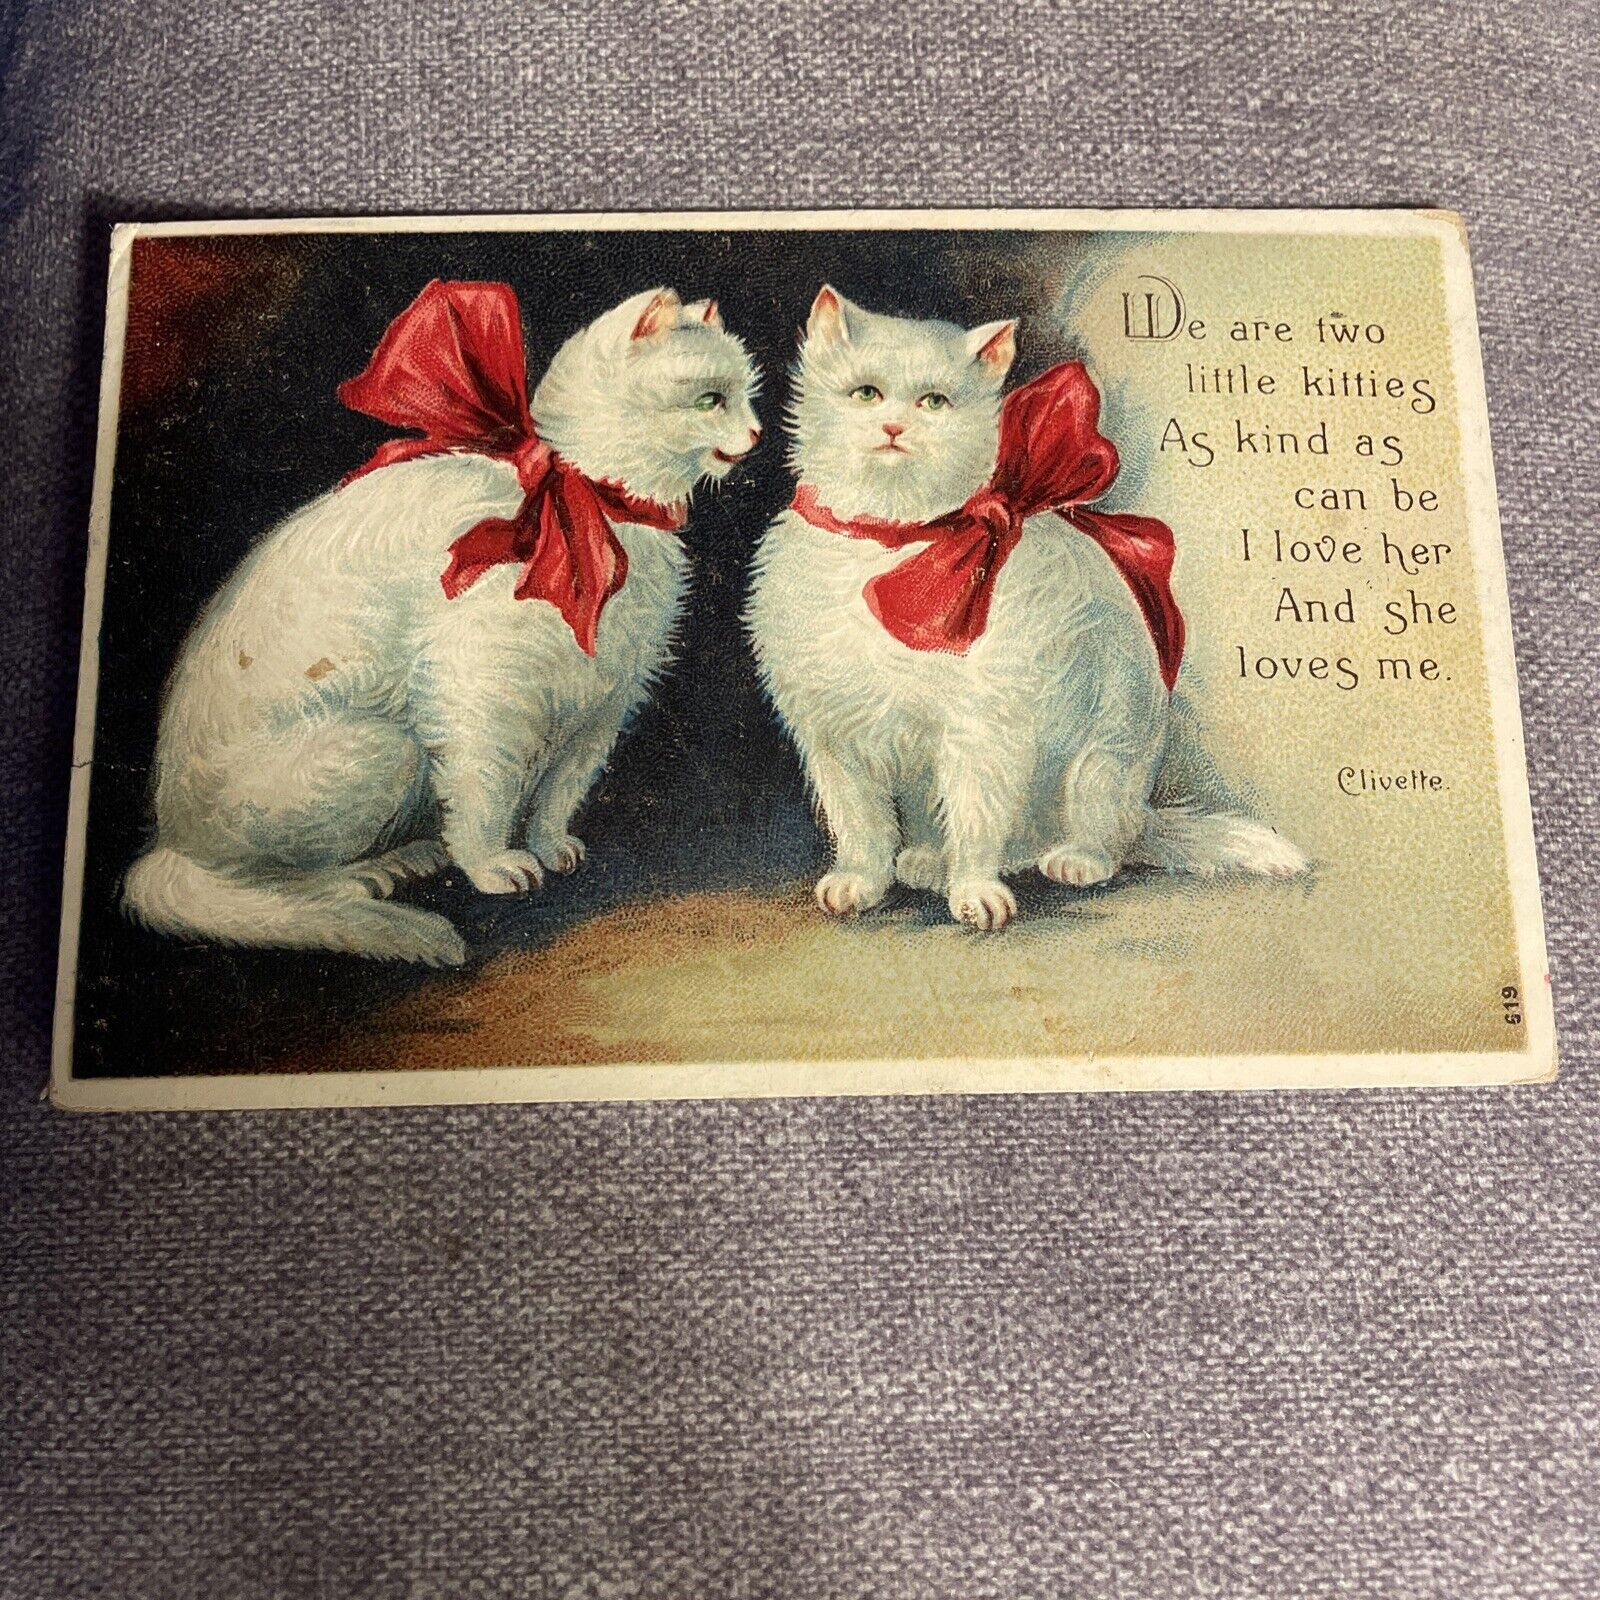 Cute White Cats With Red Bows Vintage Embossed Postcard Postmark 1907